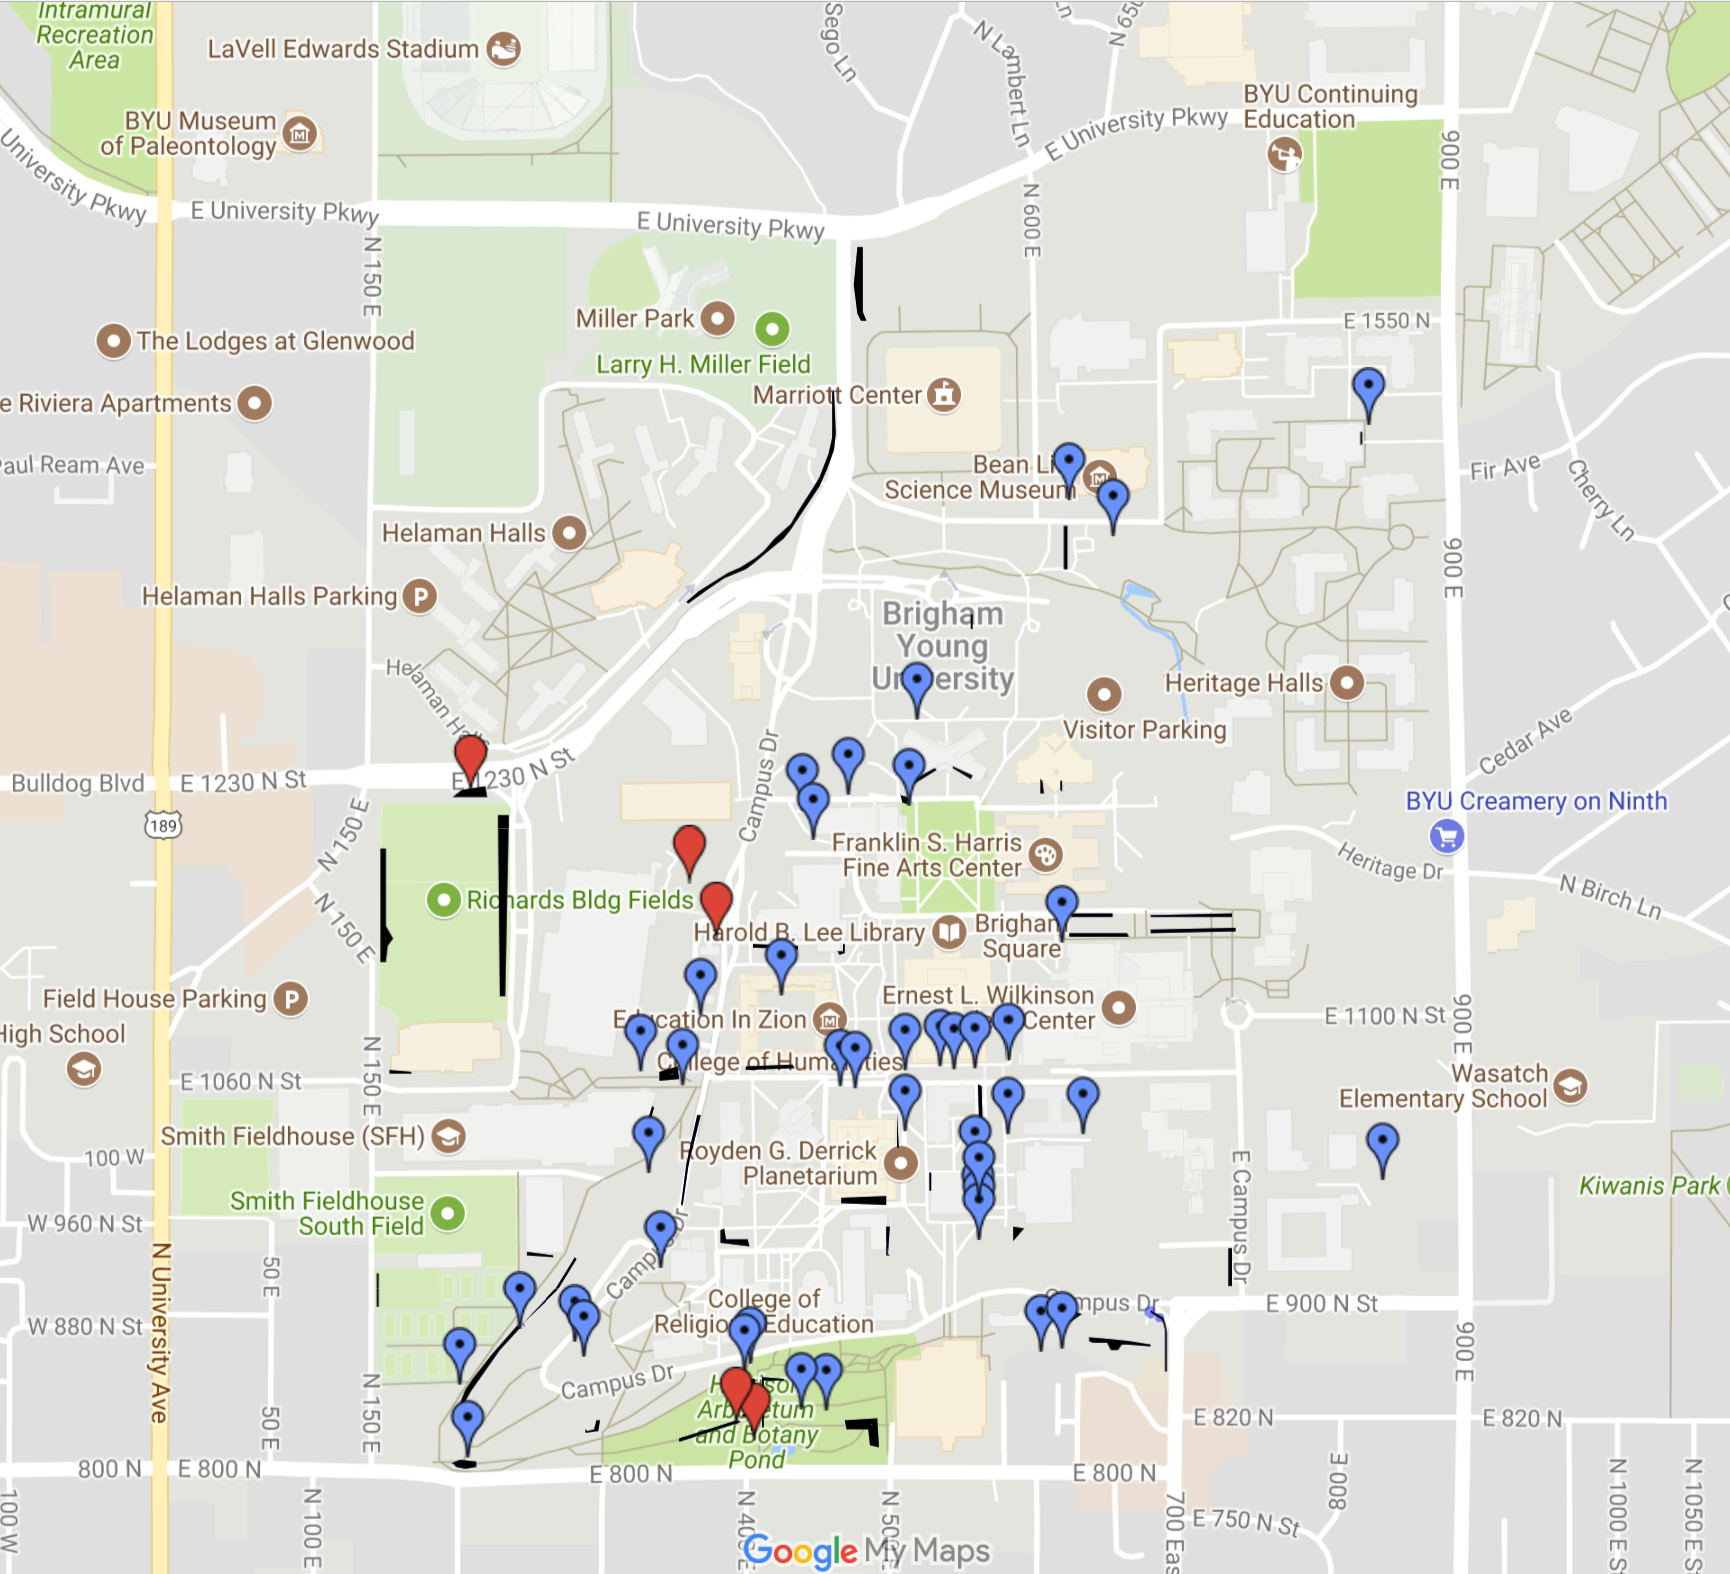 A Google map with pins dropped on it, each pin indicating the location of a plant on campus that can be eaten.